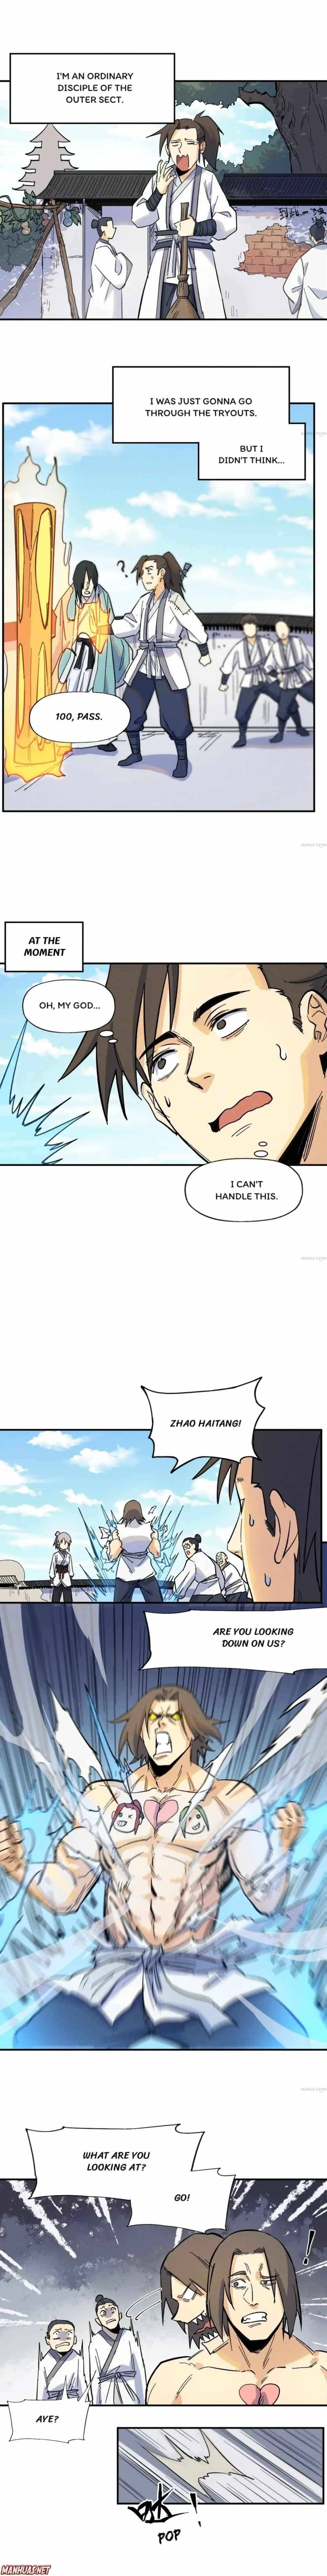 The Strongest Hero Ever - Page 1